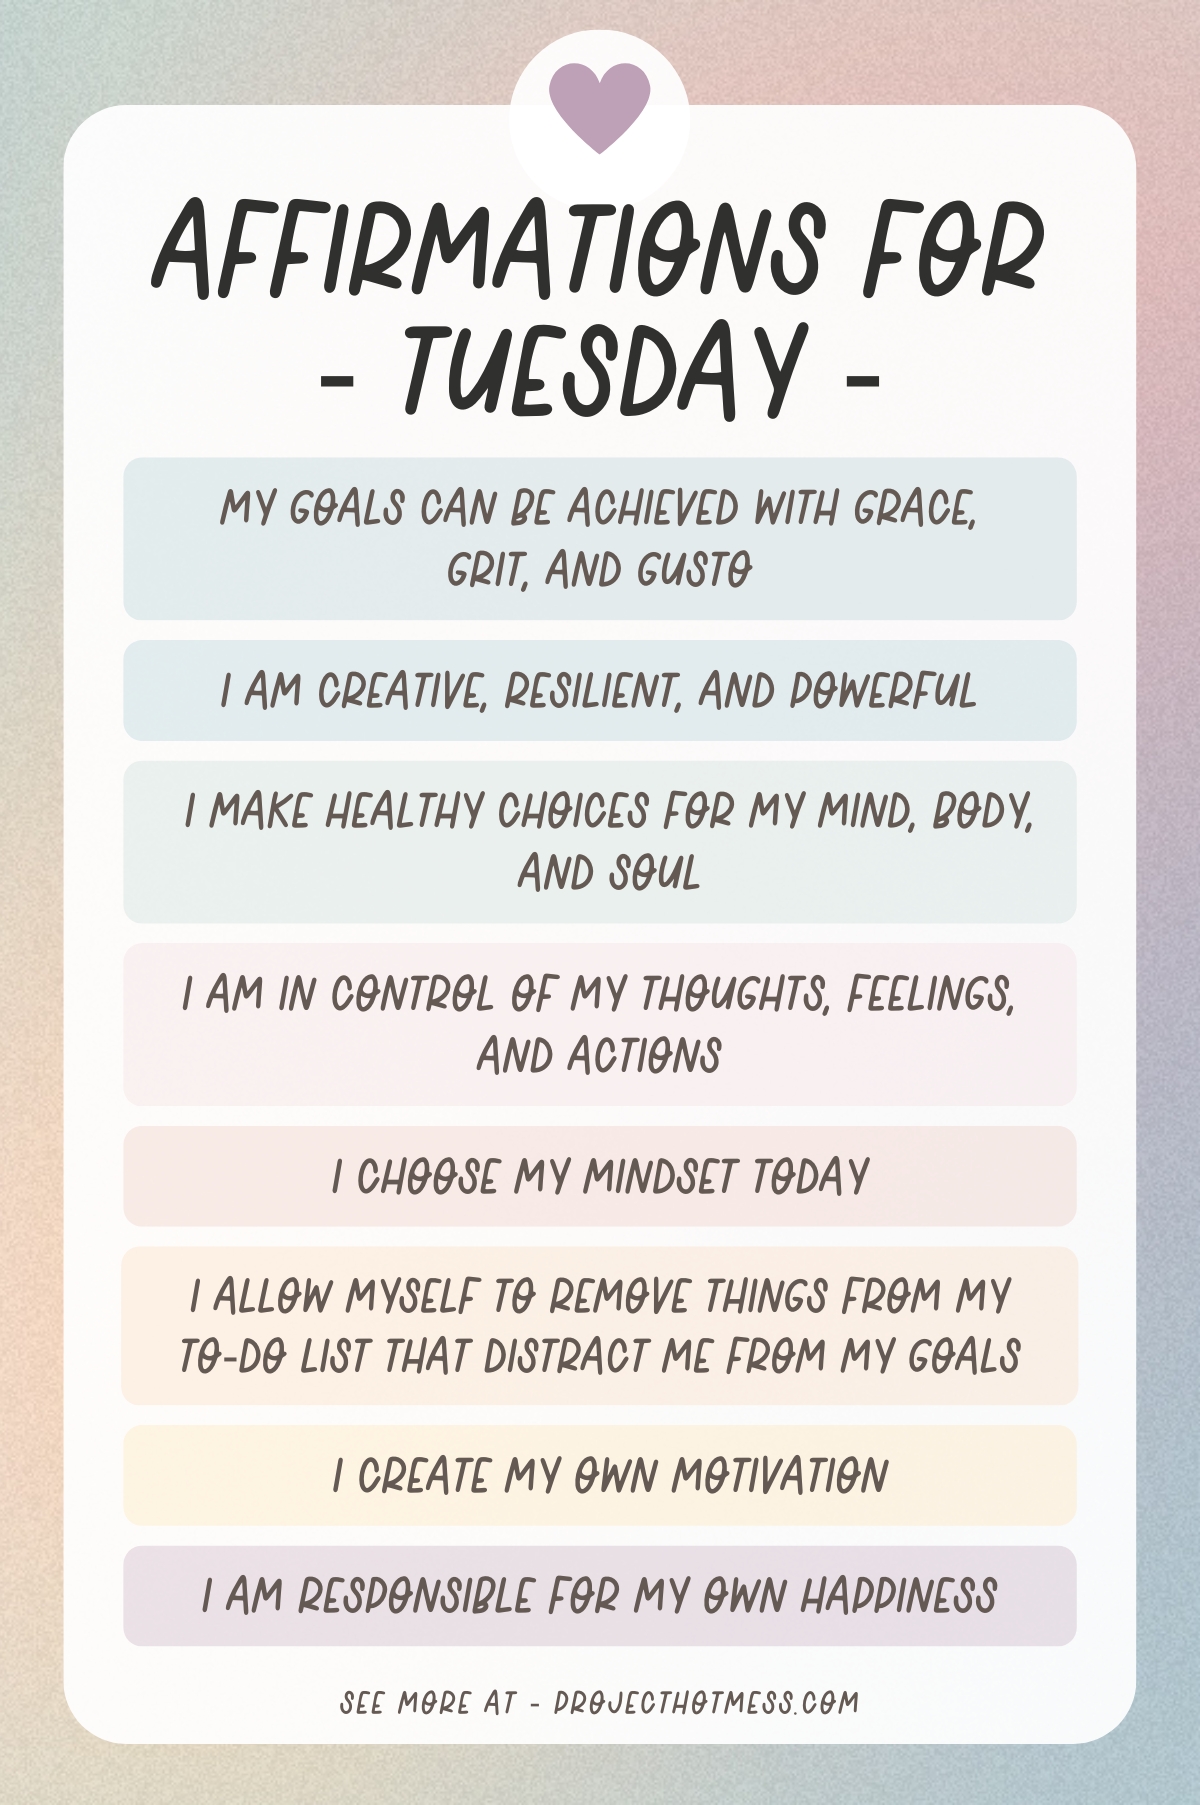 Use these Tuesday Affirmations to boost your motivation and maintain momentum throughout the week. Add these to your daily affirmation practice.